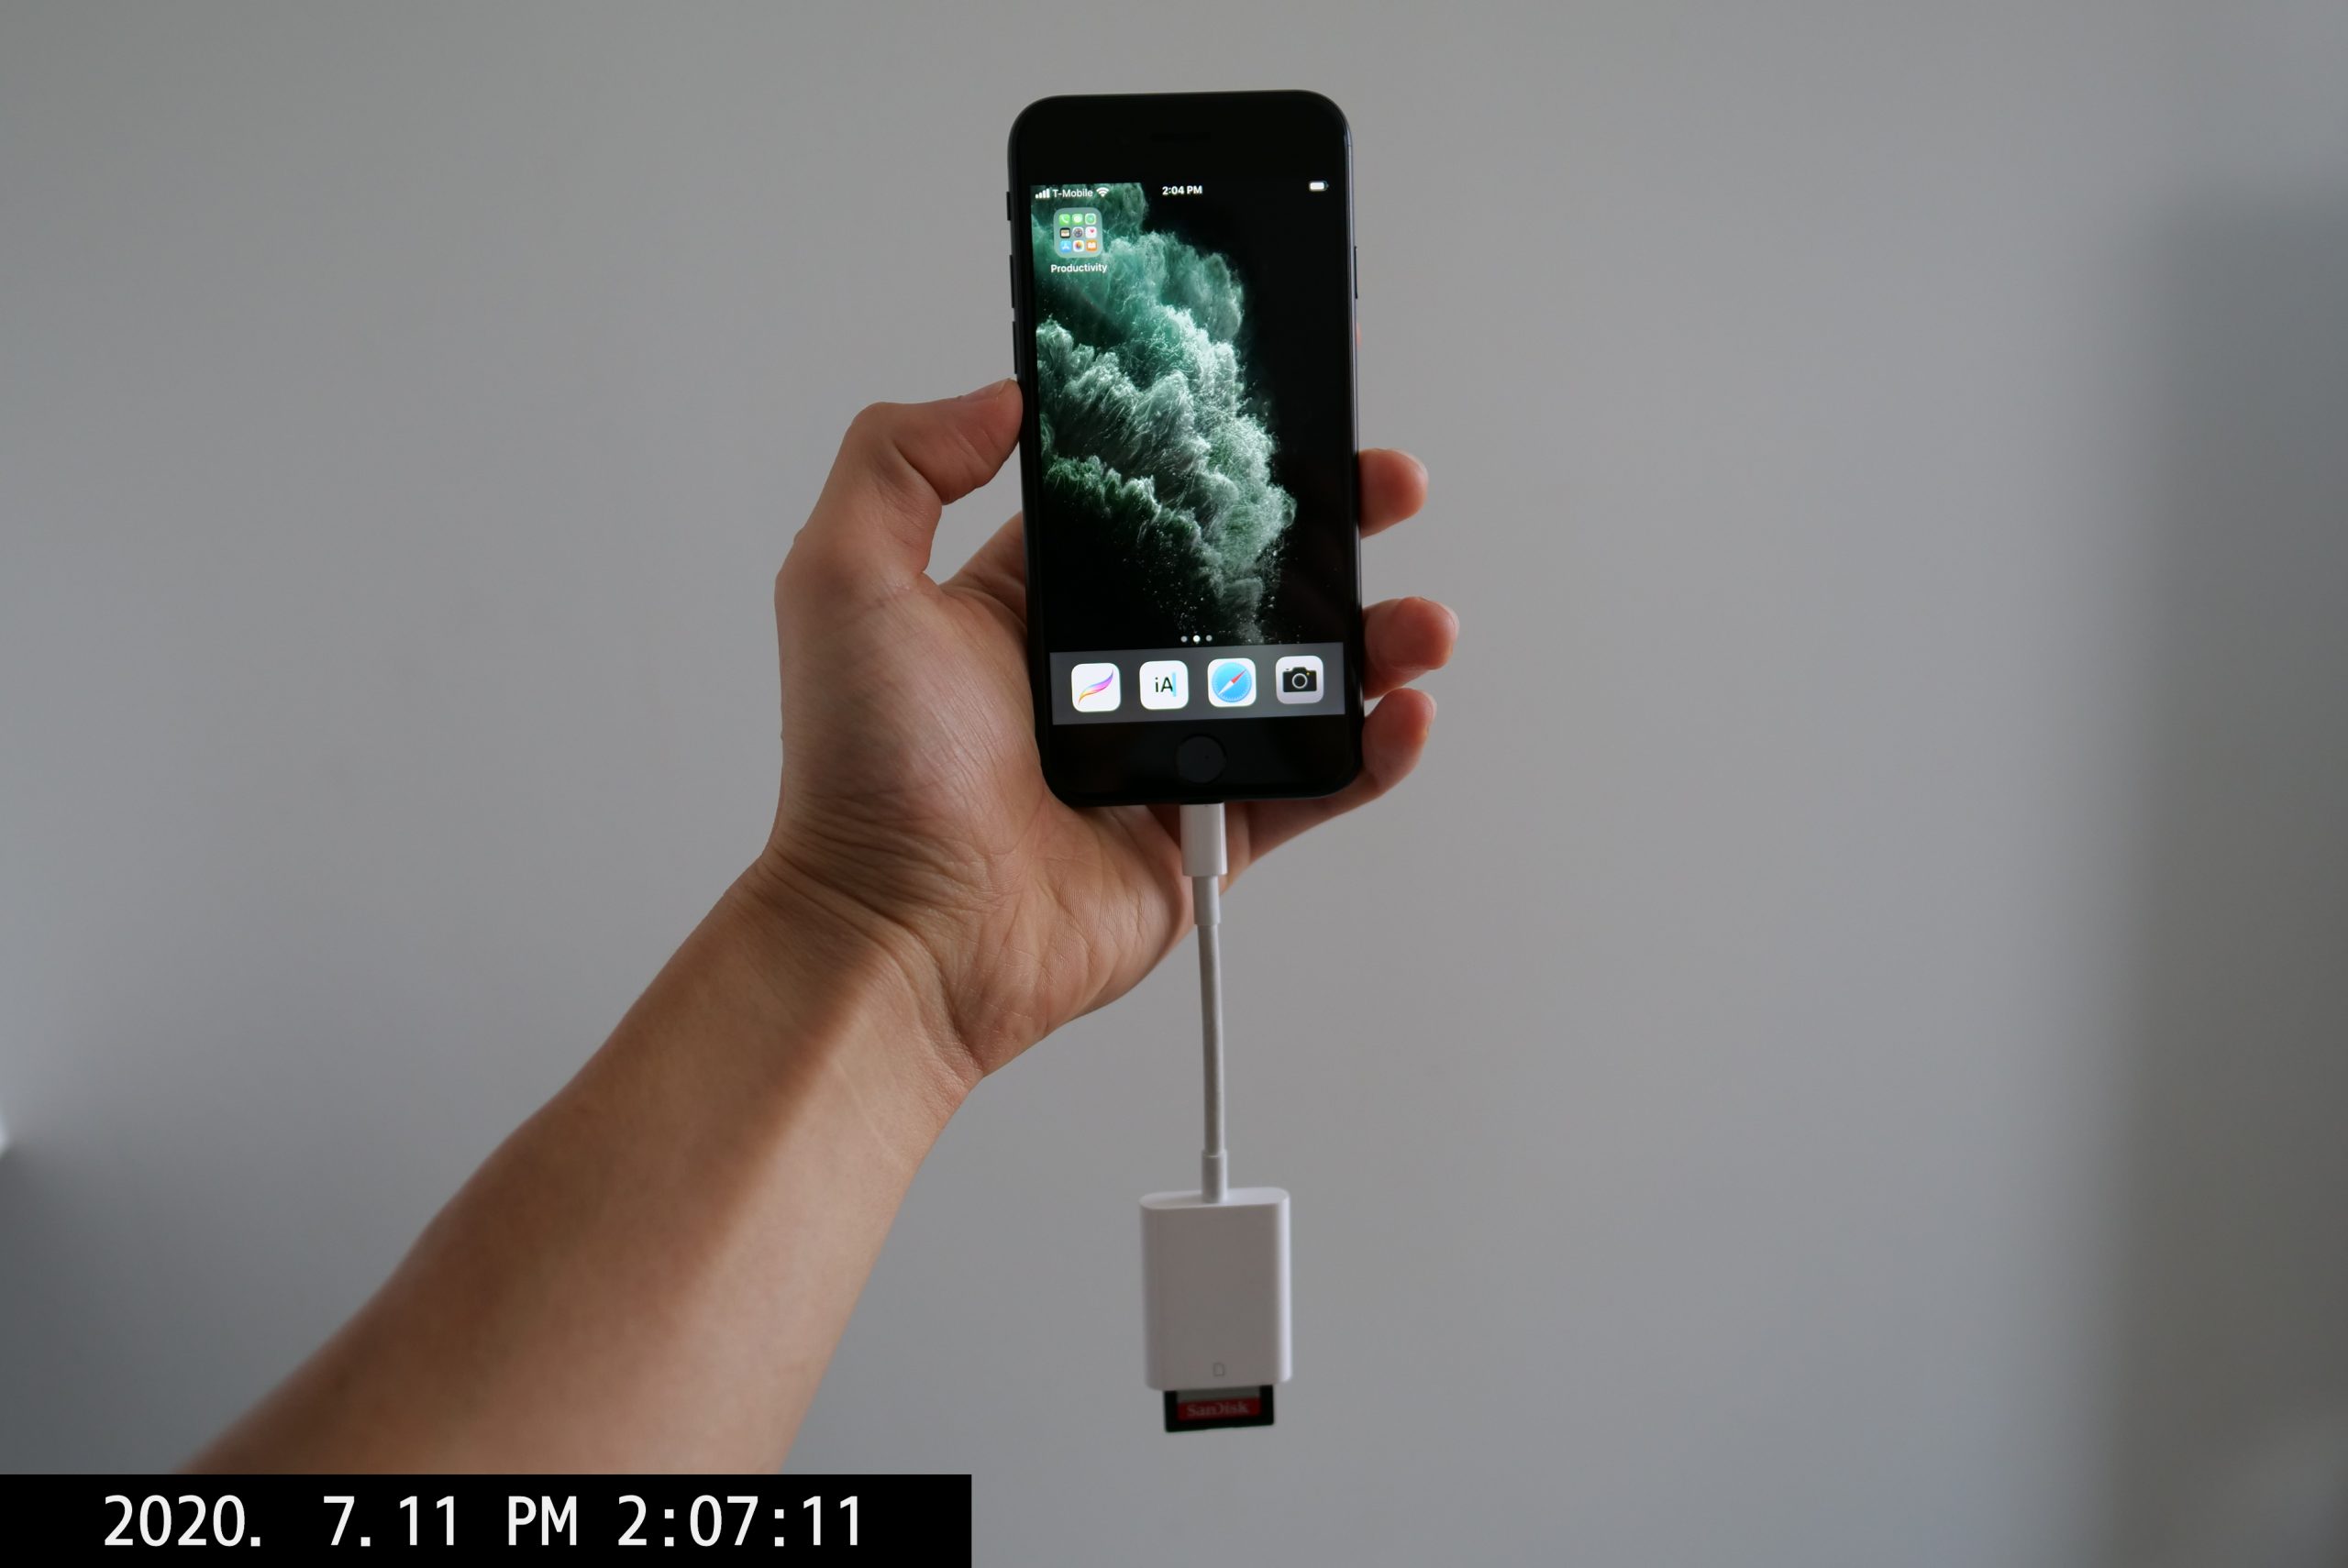 How to Import Your Photos from SD Card to iPhone with Lightning SD Card Adapter